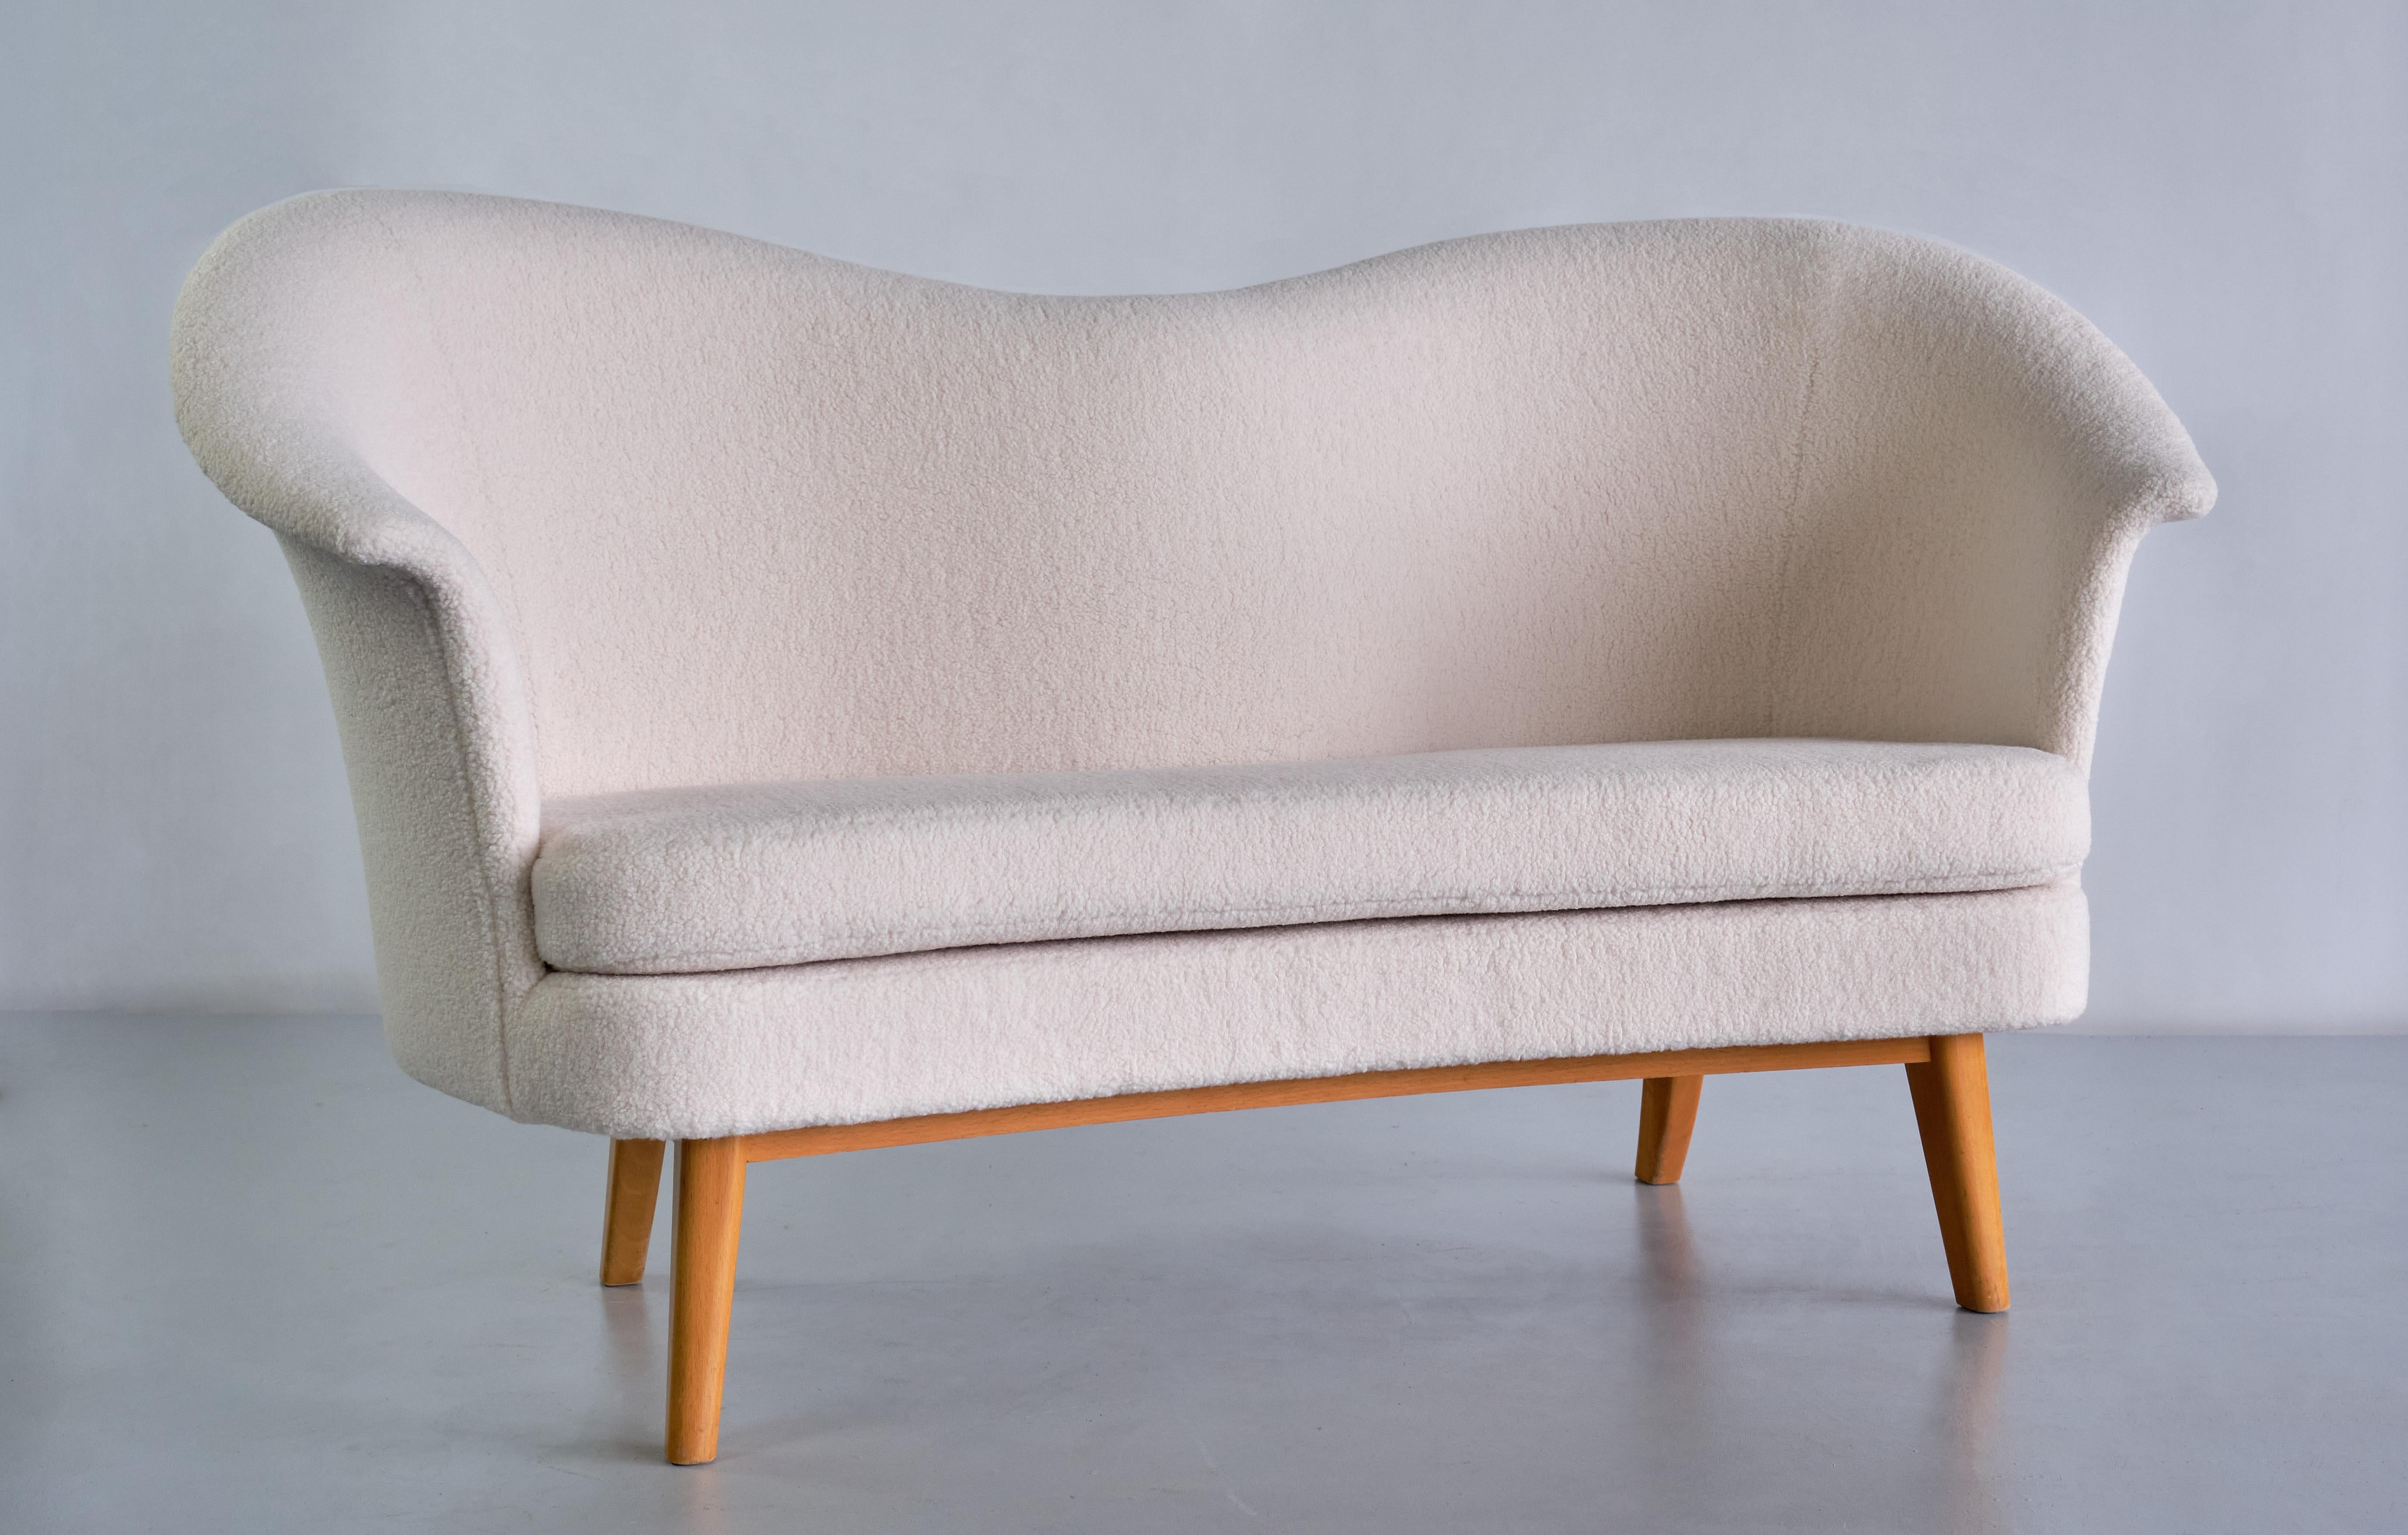 This rare sofa was designed by Olof Ottelin and produced by Keravan Puusepäntehdas for the Stockmann company in Finland in the 1950s. This distinctive two-seat model was named 'Duetto'. The design is marked by the beautifully curved lines of the